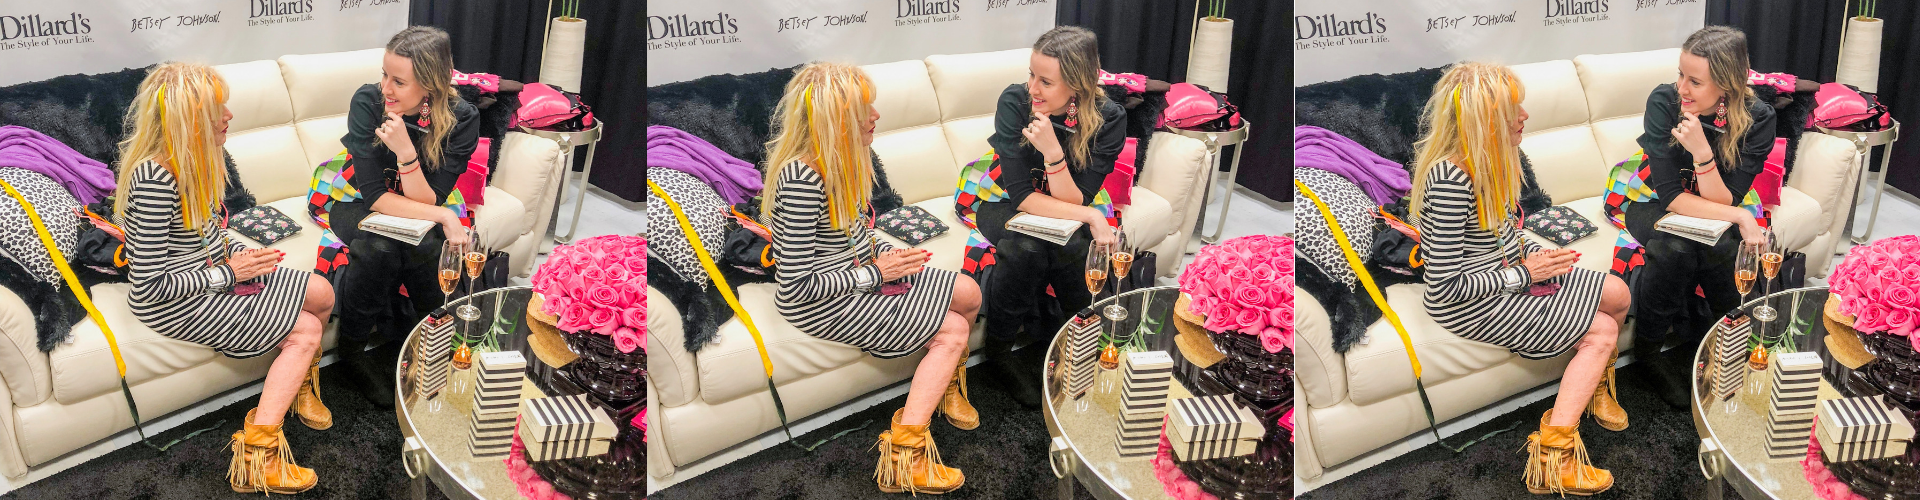 DESIGNER DISH: Betsey Johnson’s thoughts on life and leading the retail game at 76 years young